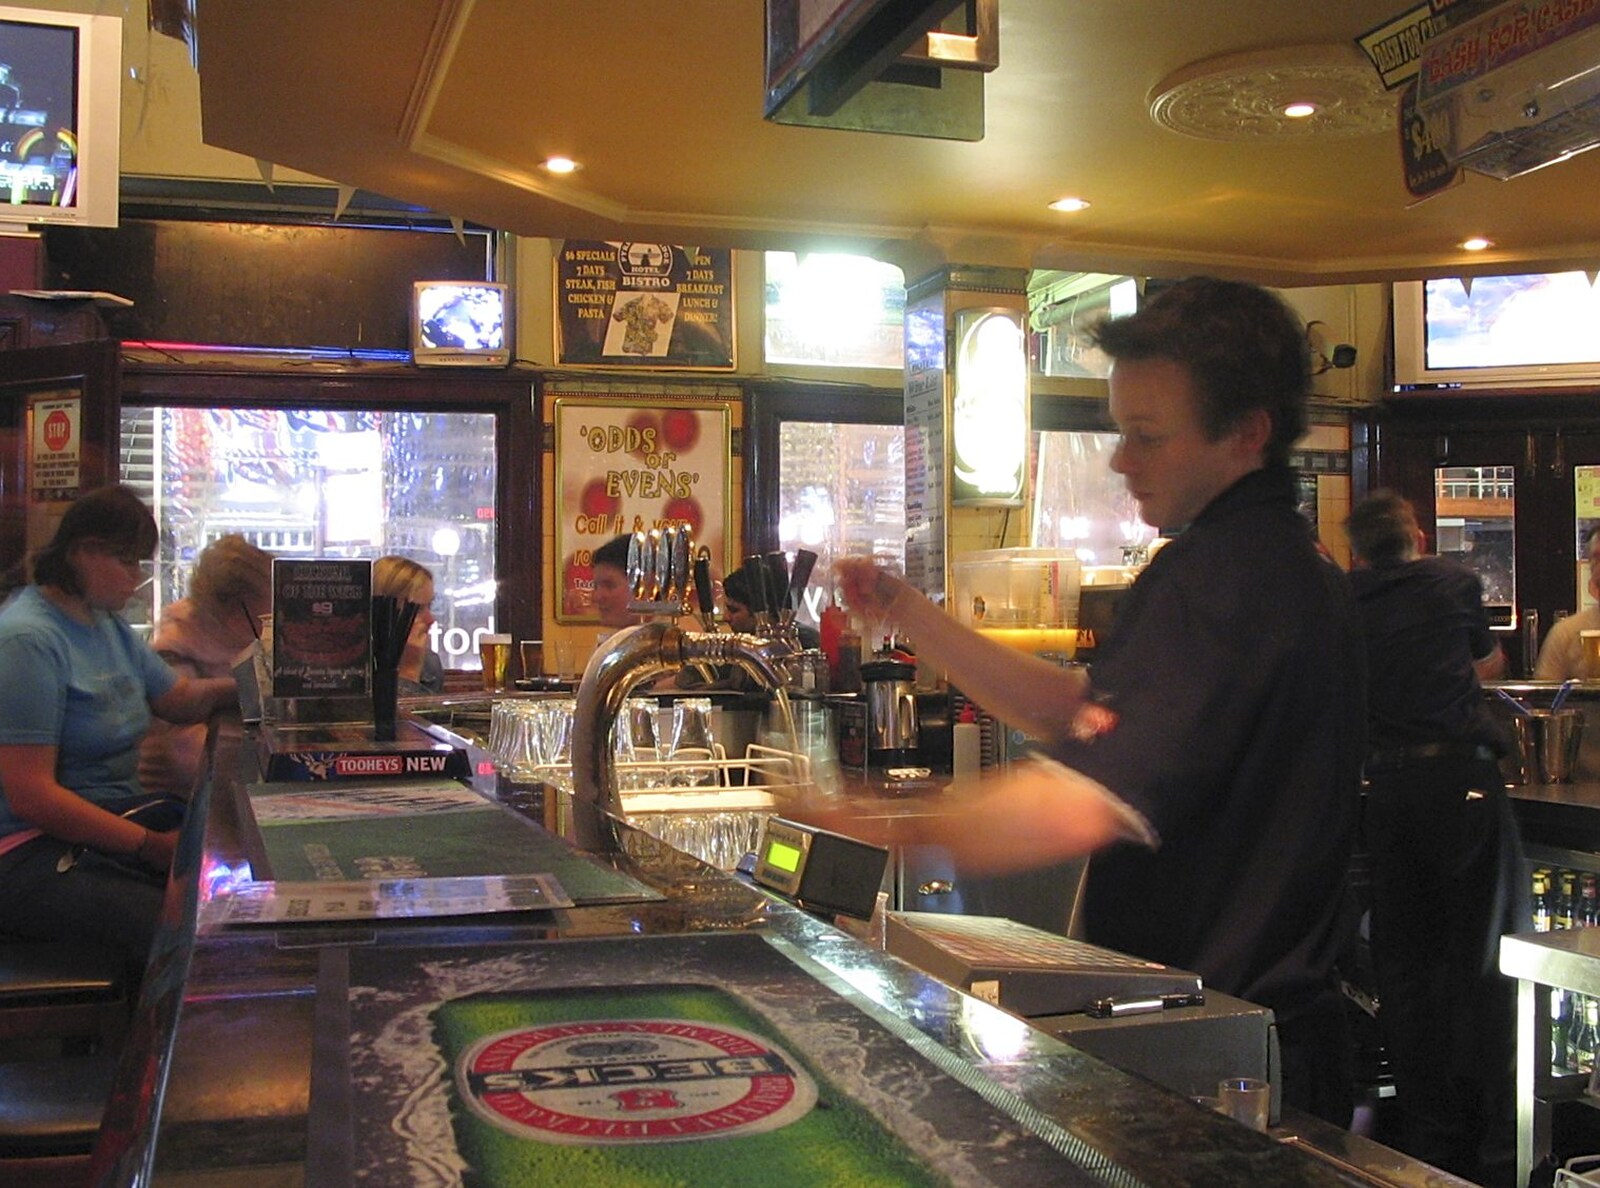 The Pyrmont Bridge Hotel pub from Sydney, New South Wales, Australia - 10th October 2004